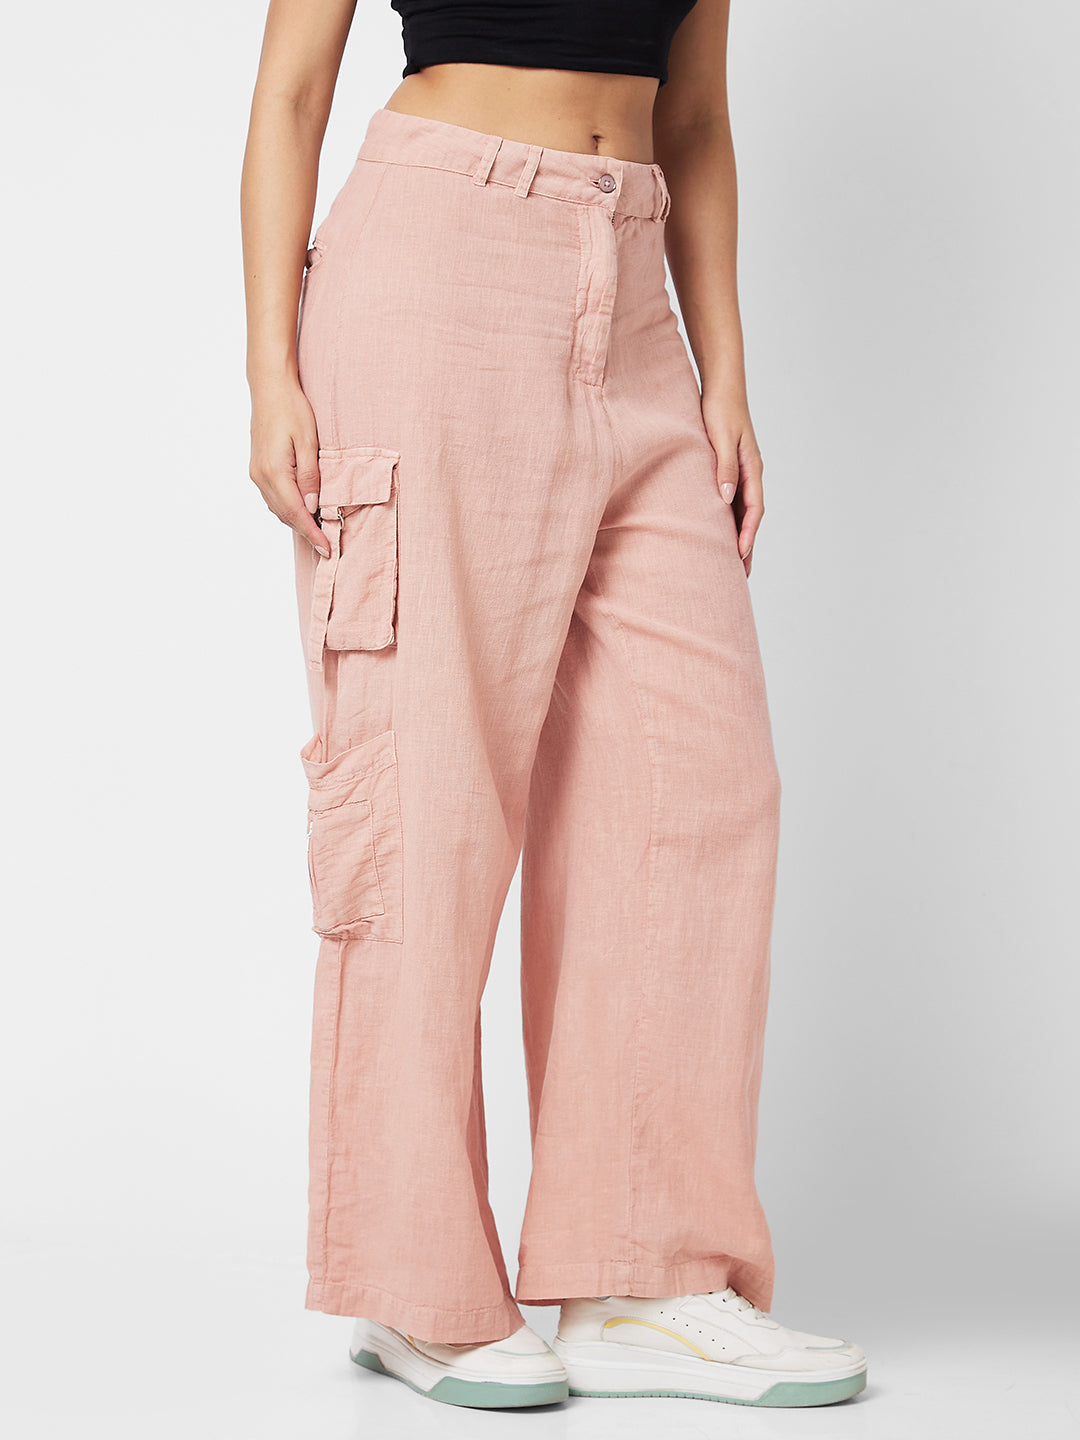 Spykar High Rise Pink Trousers For Women